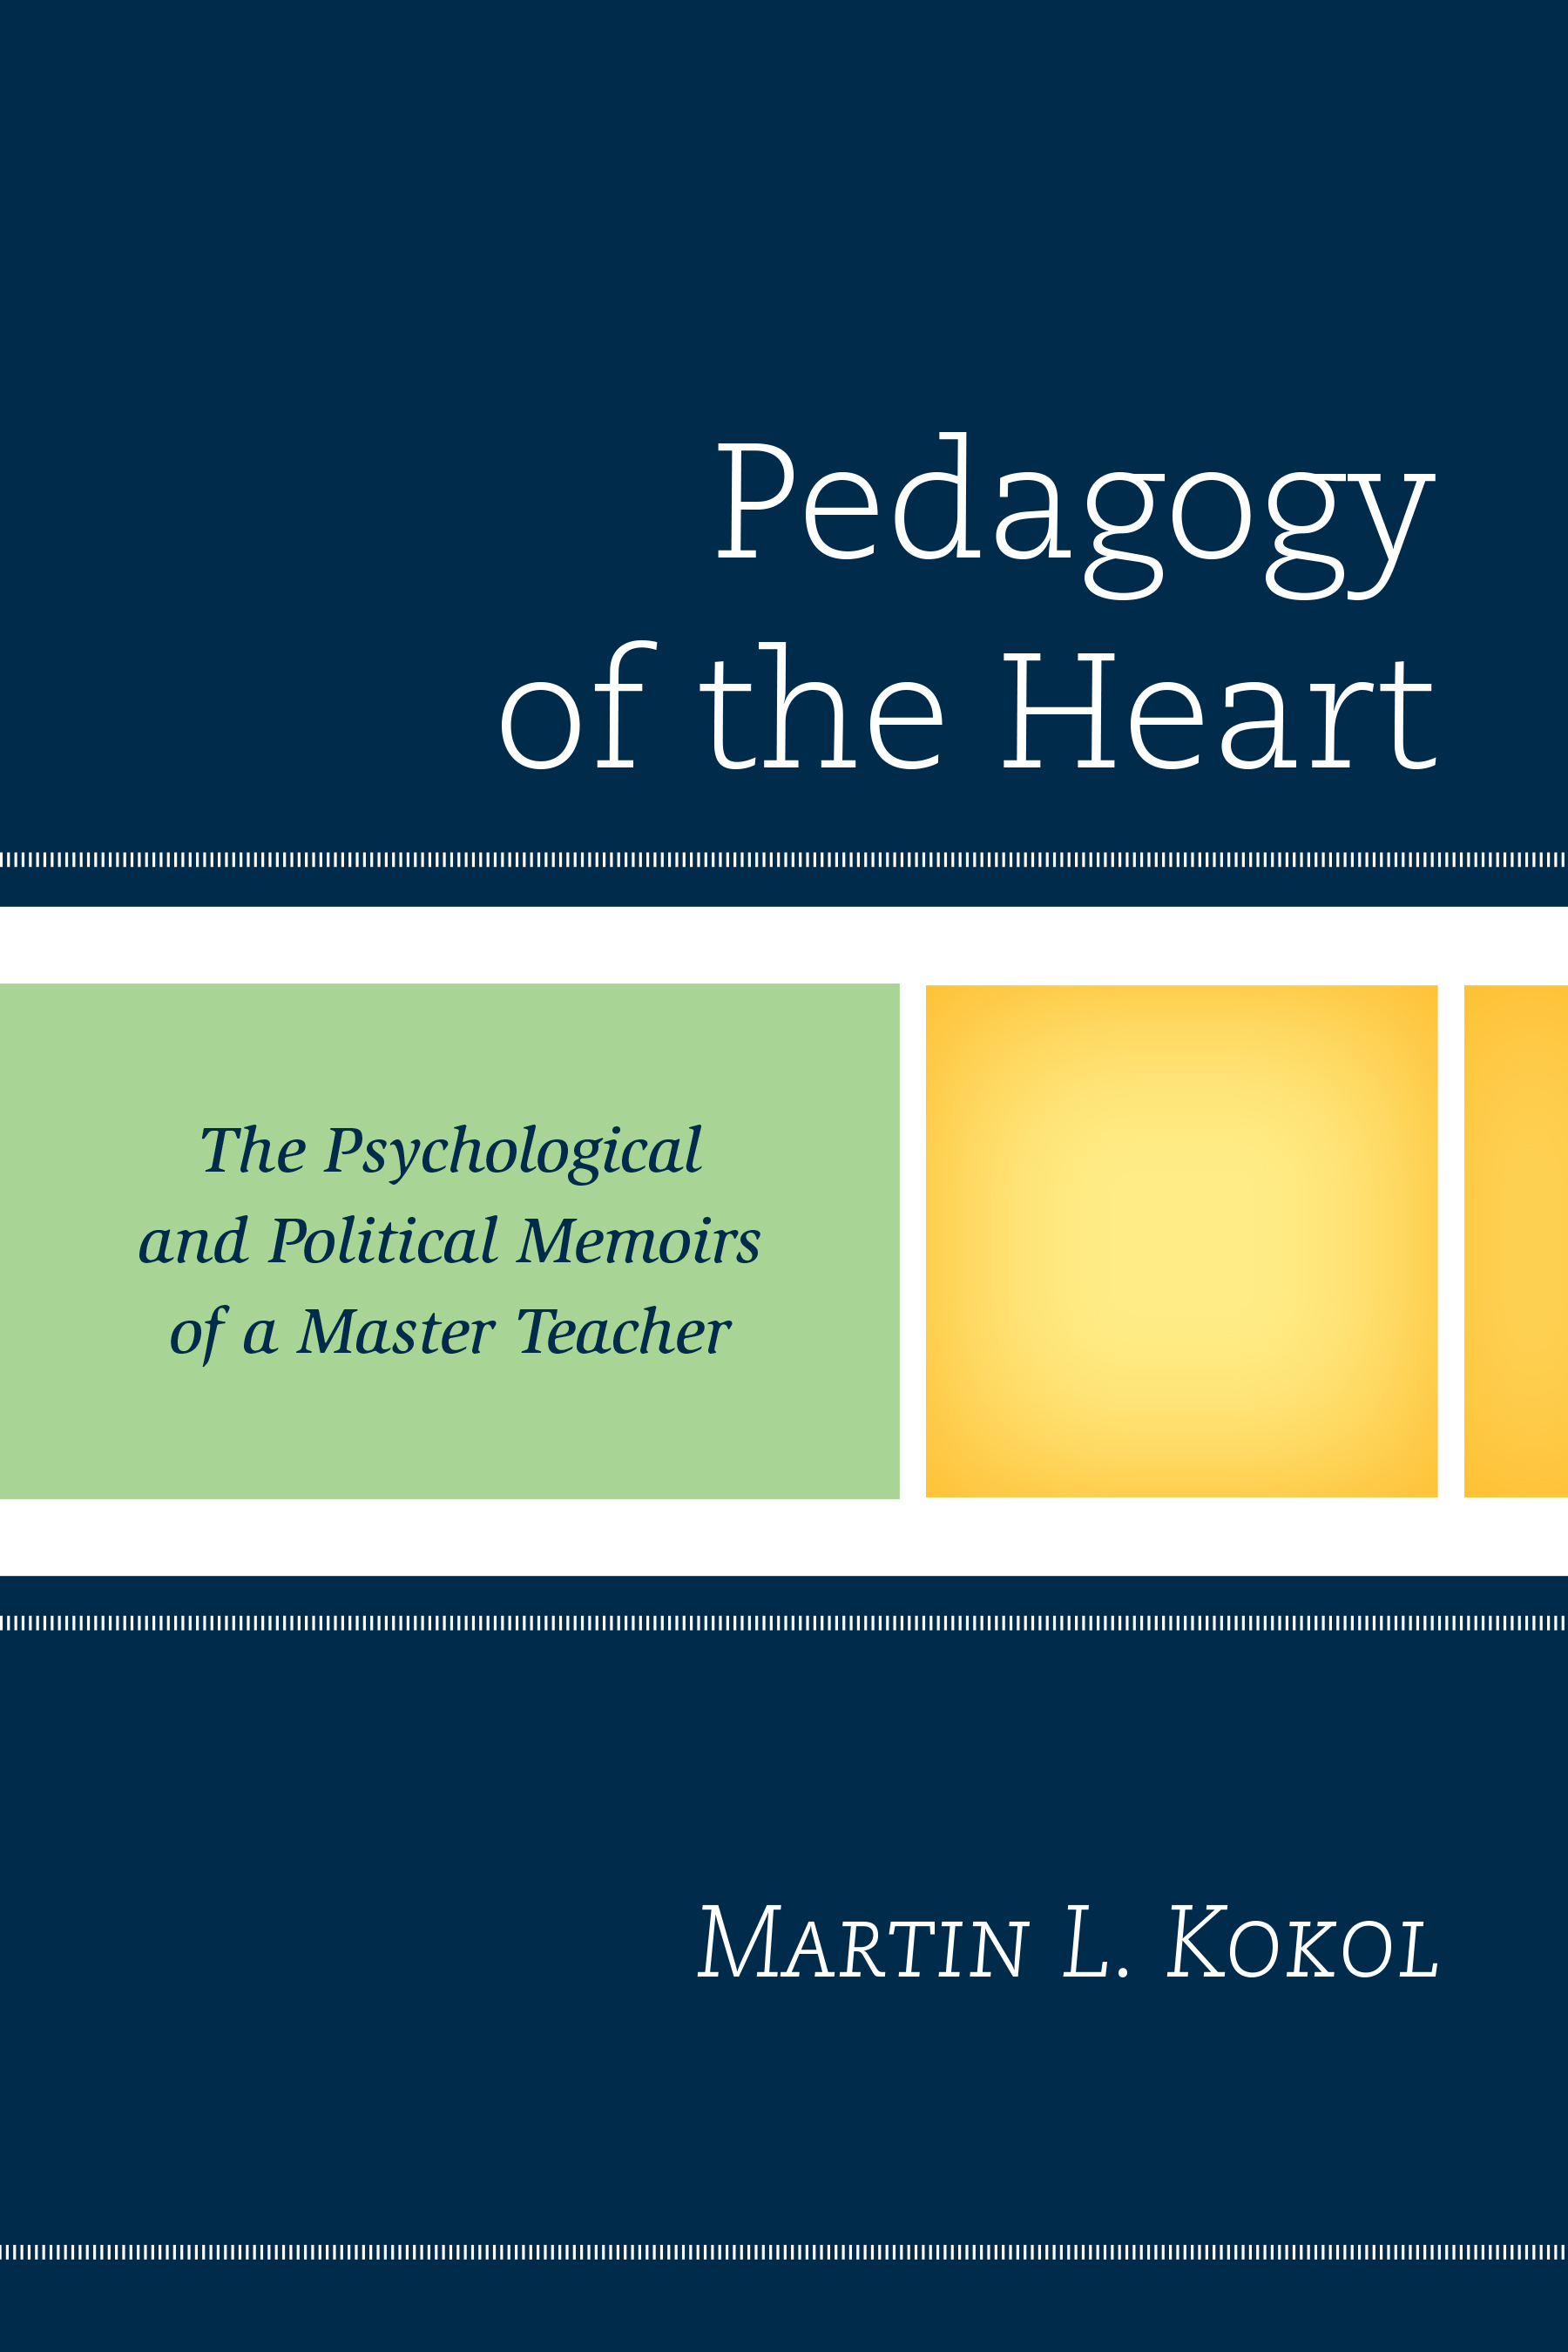 Pedagogy of the Heart: The Psychological and Political Memoirs of a Master Teacher